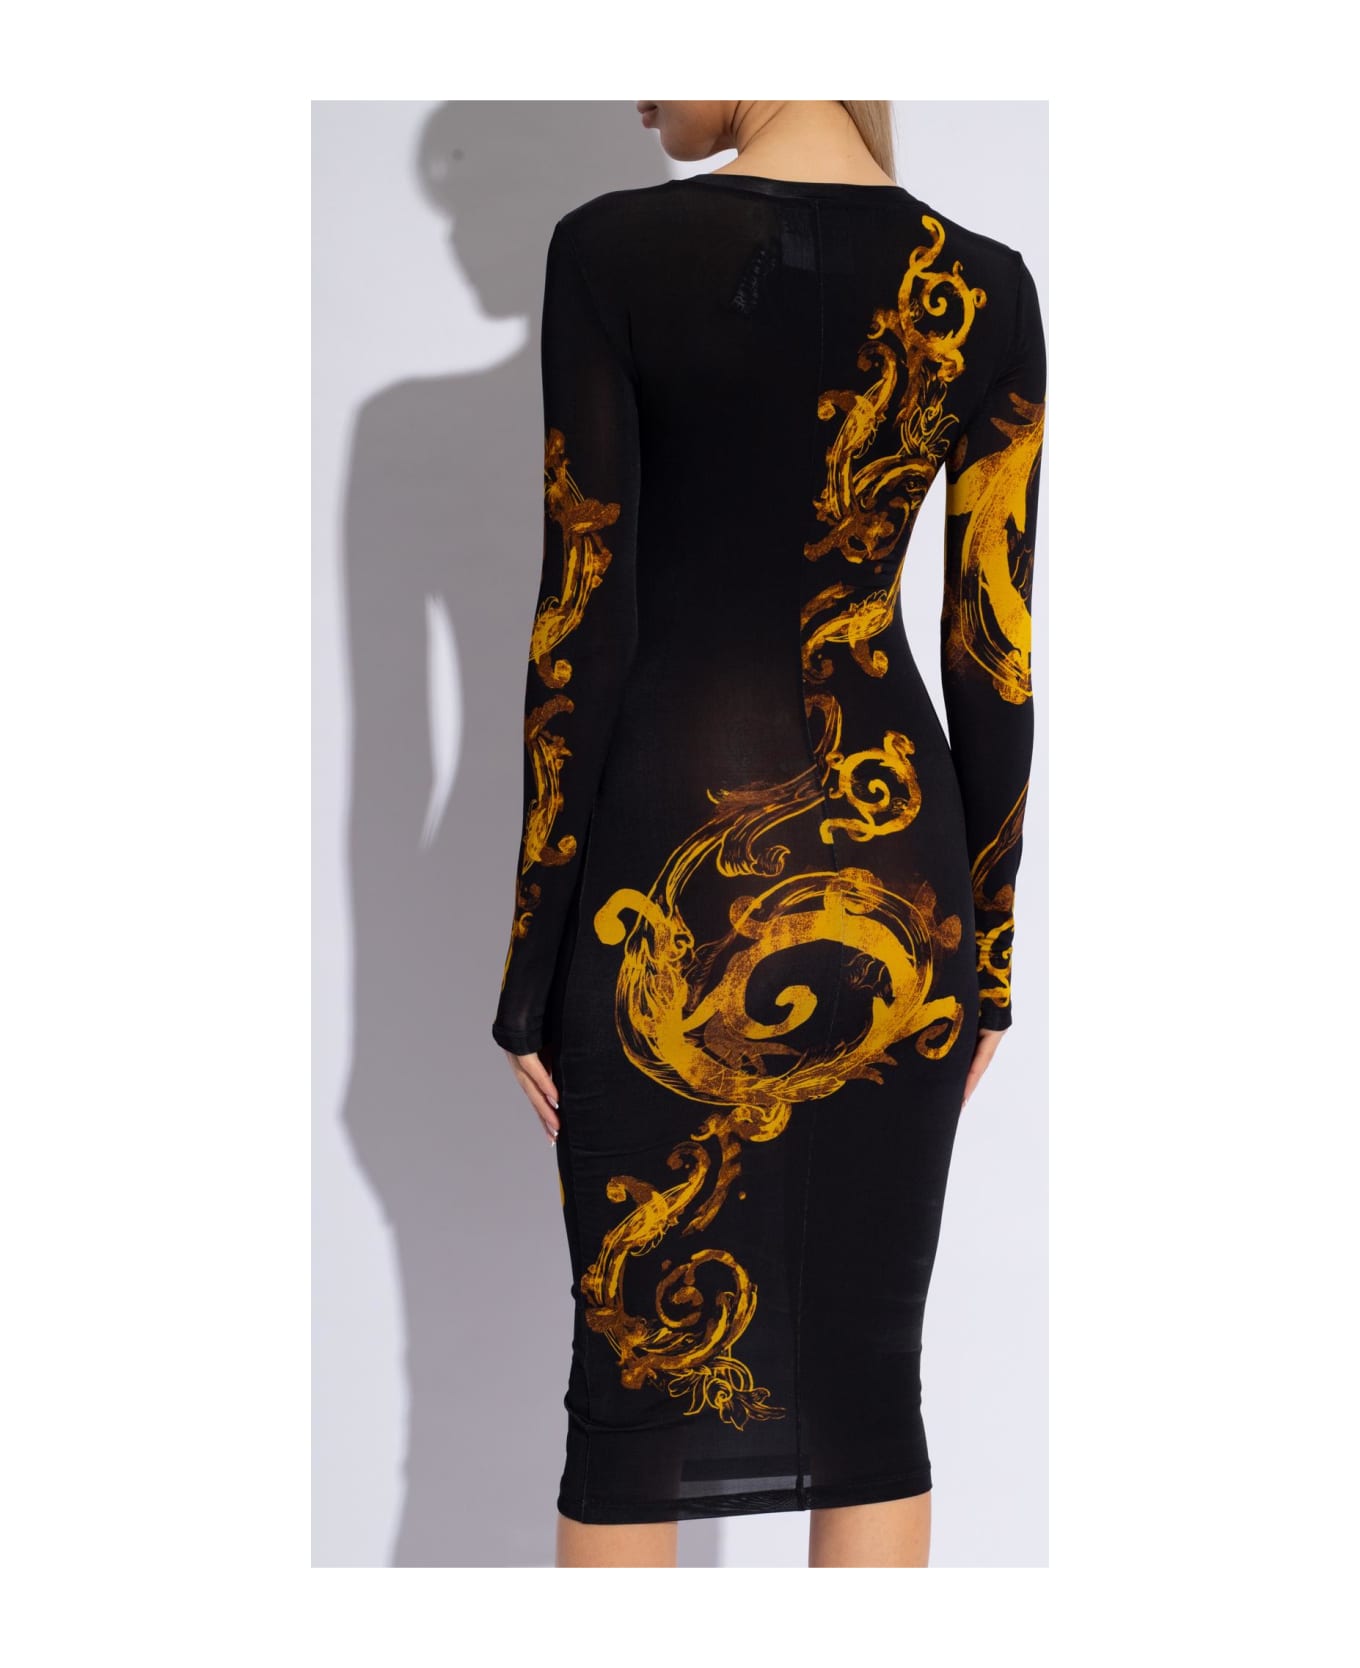 Versace Jeans Couture Dress With Long Sleeves - Black